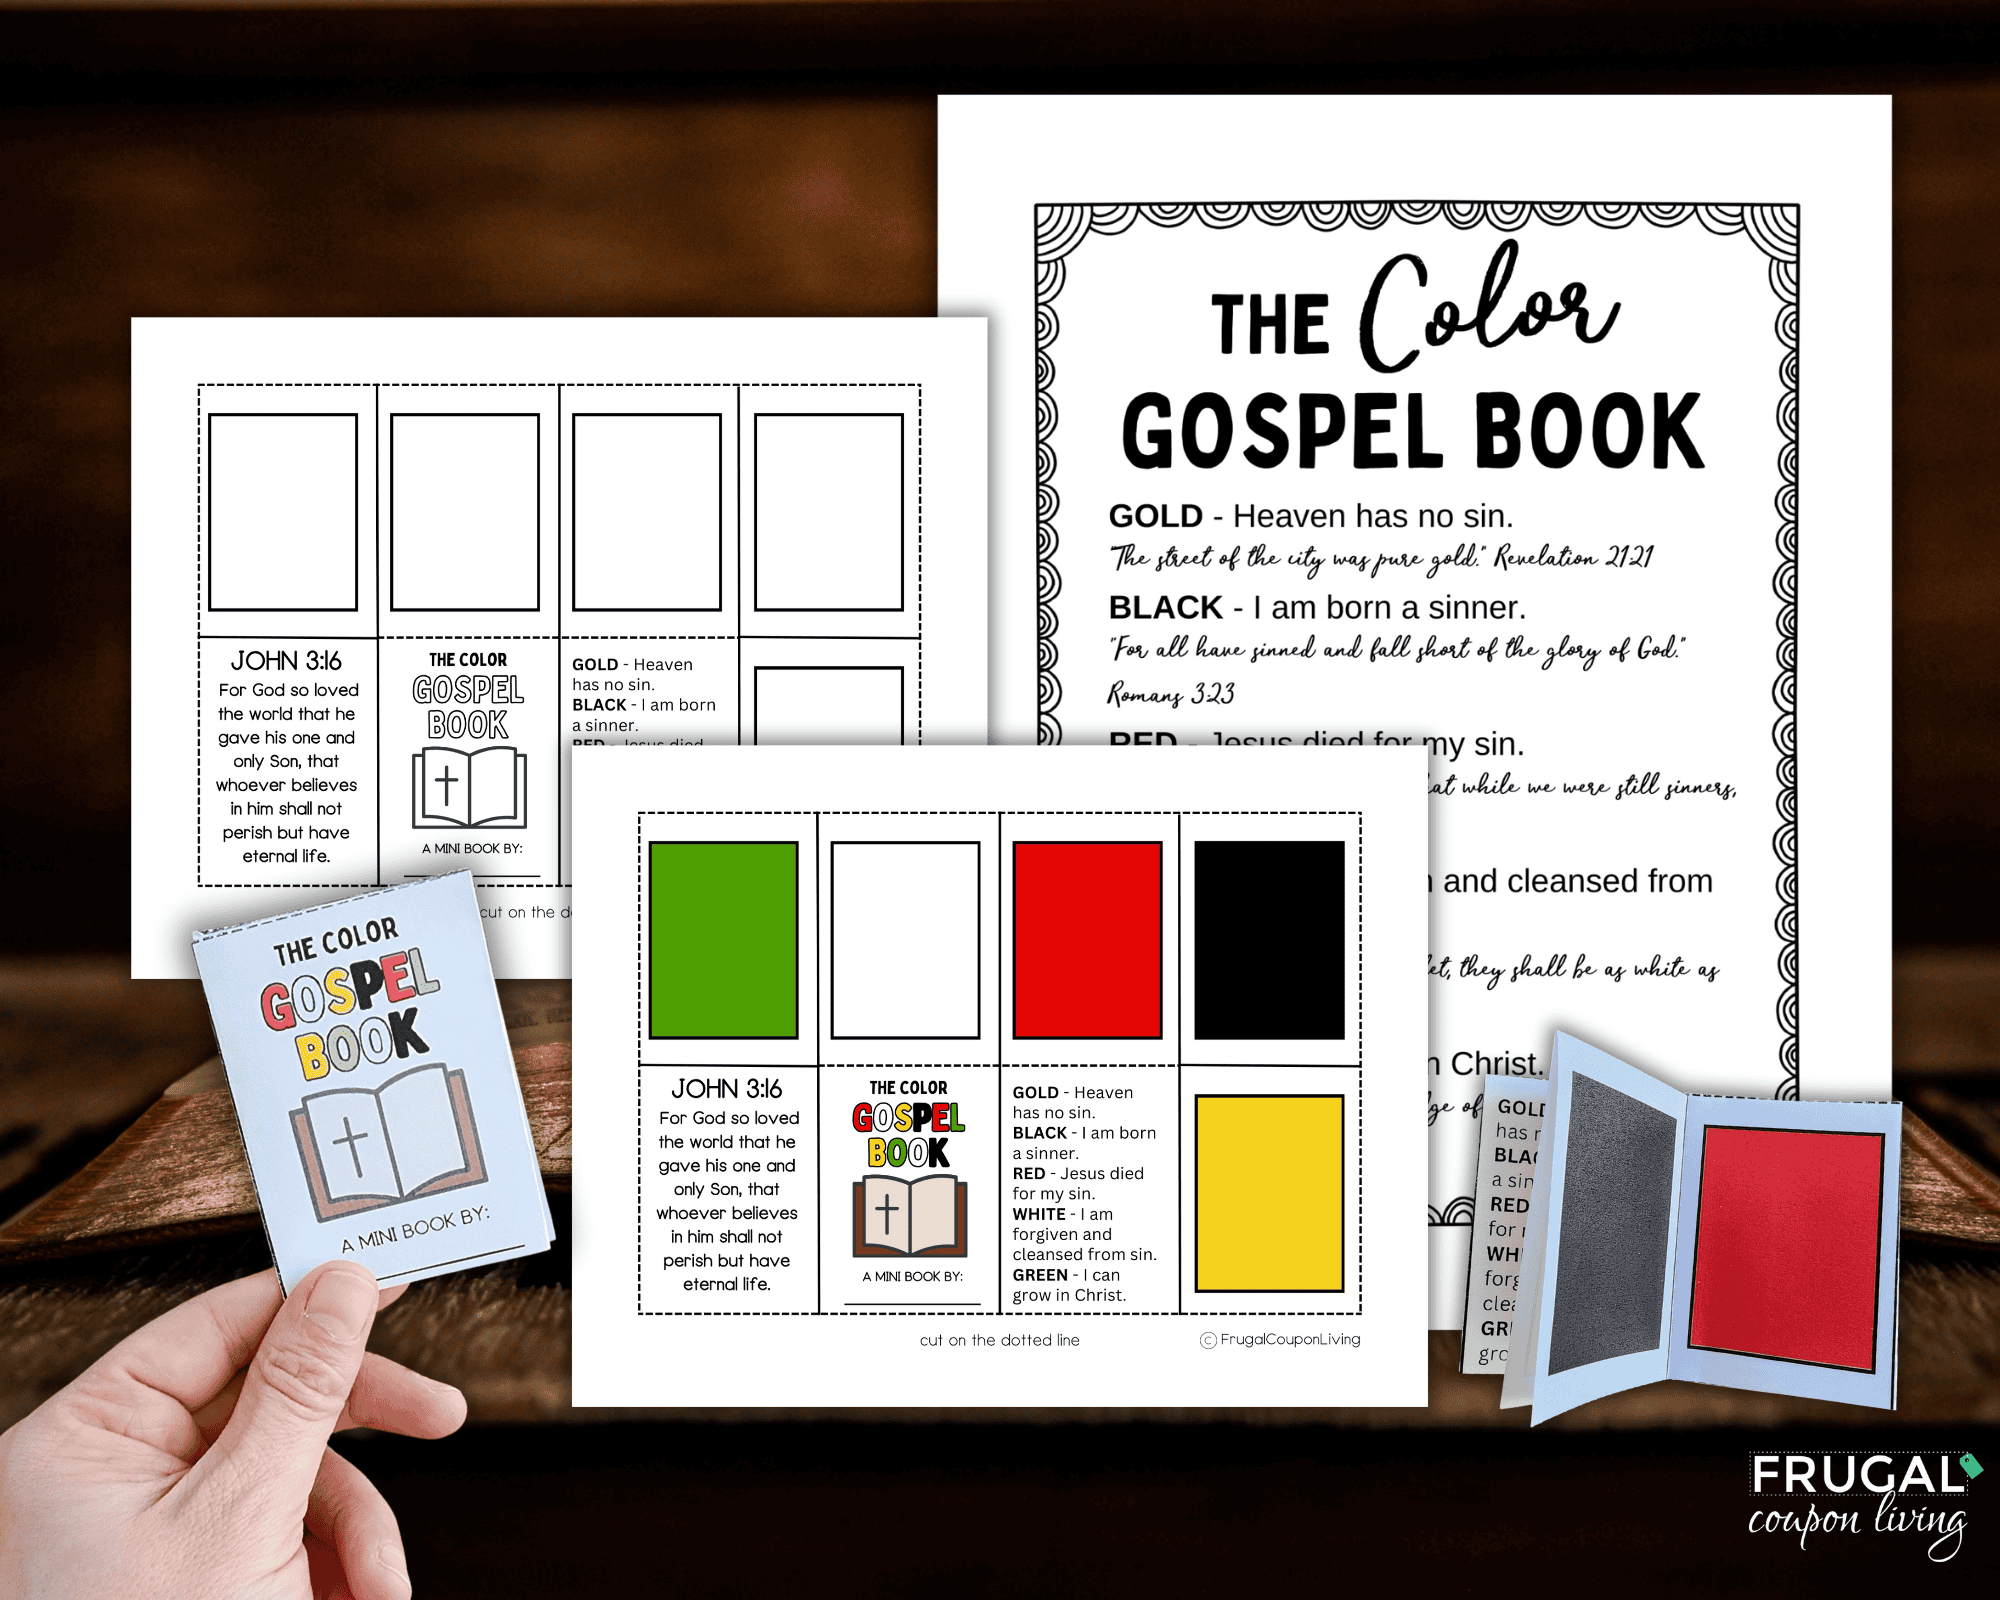 The wordless gospel book of colors